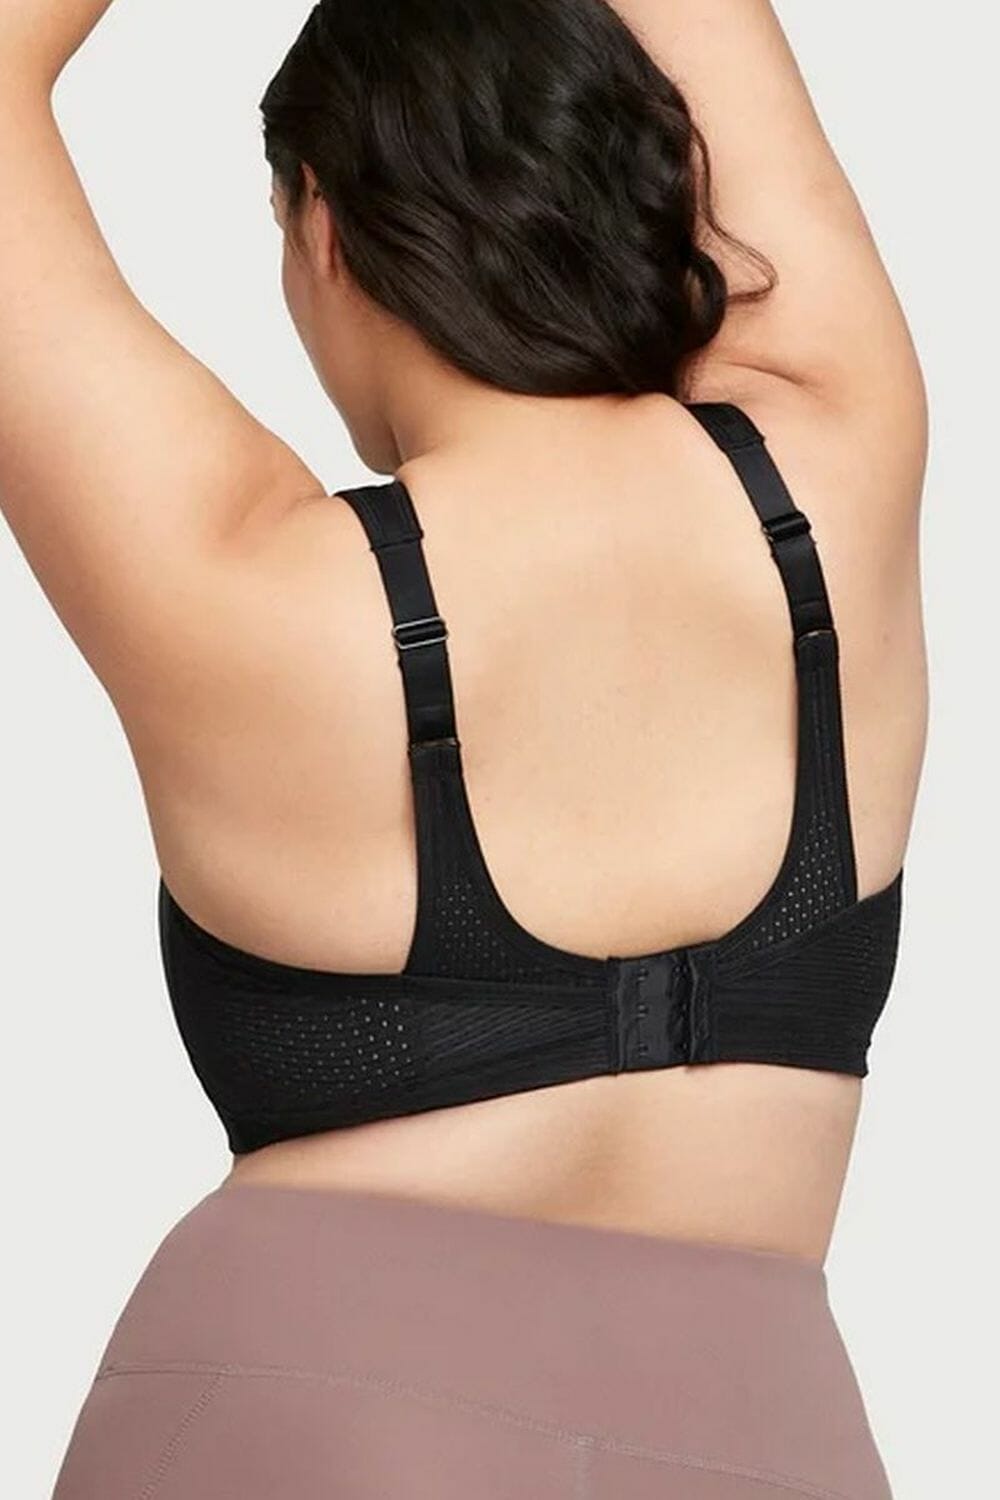 bounce control - Sports Bras Direct